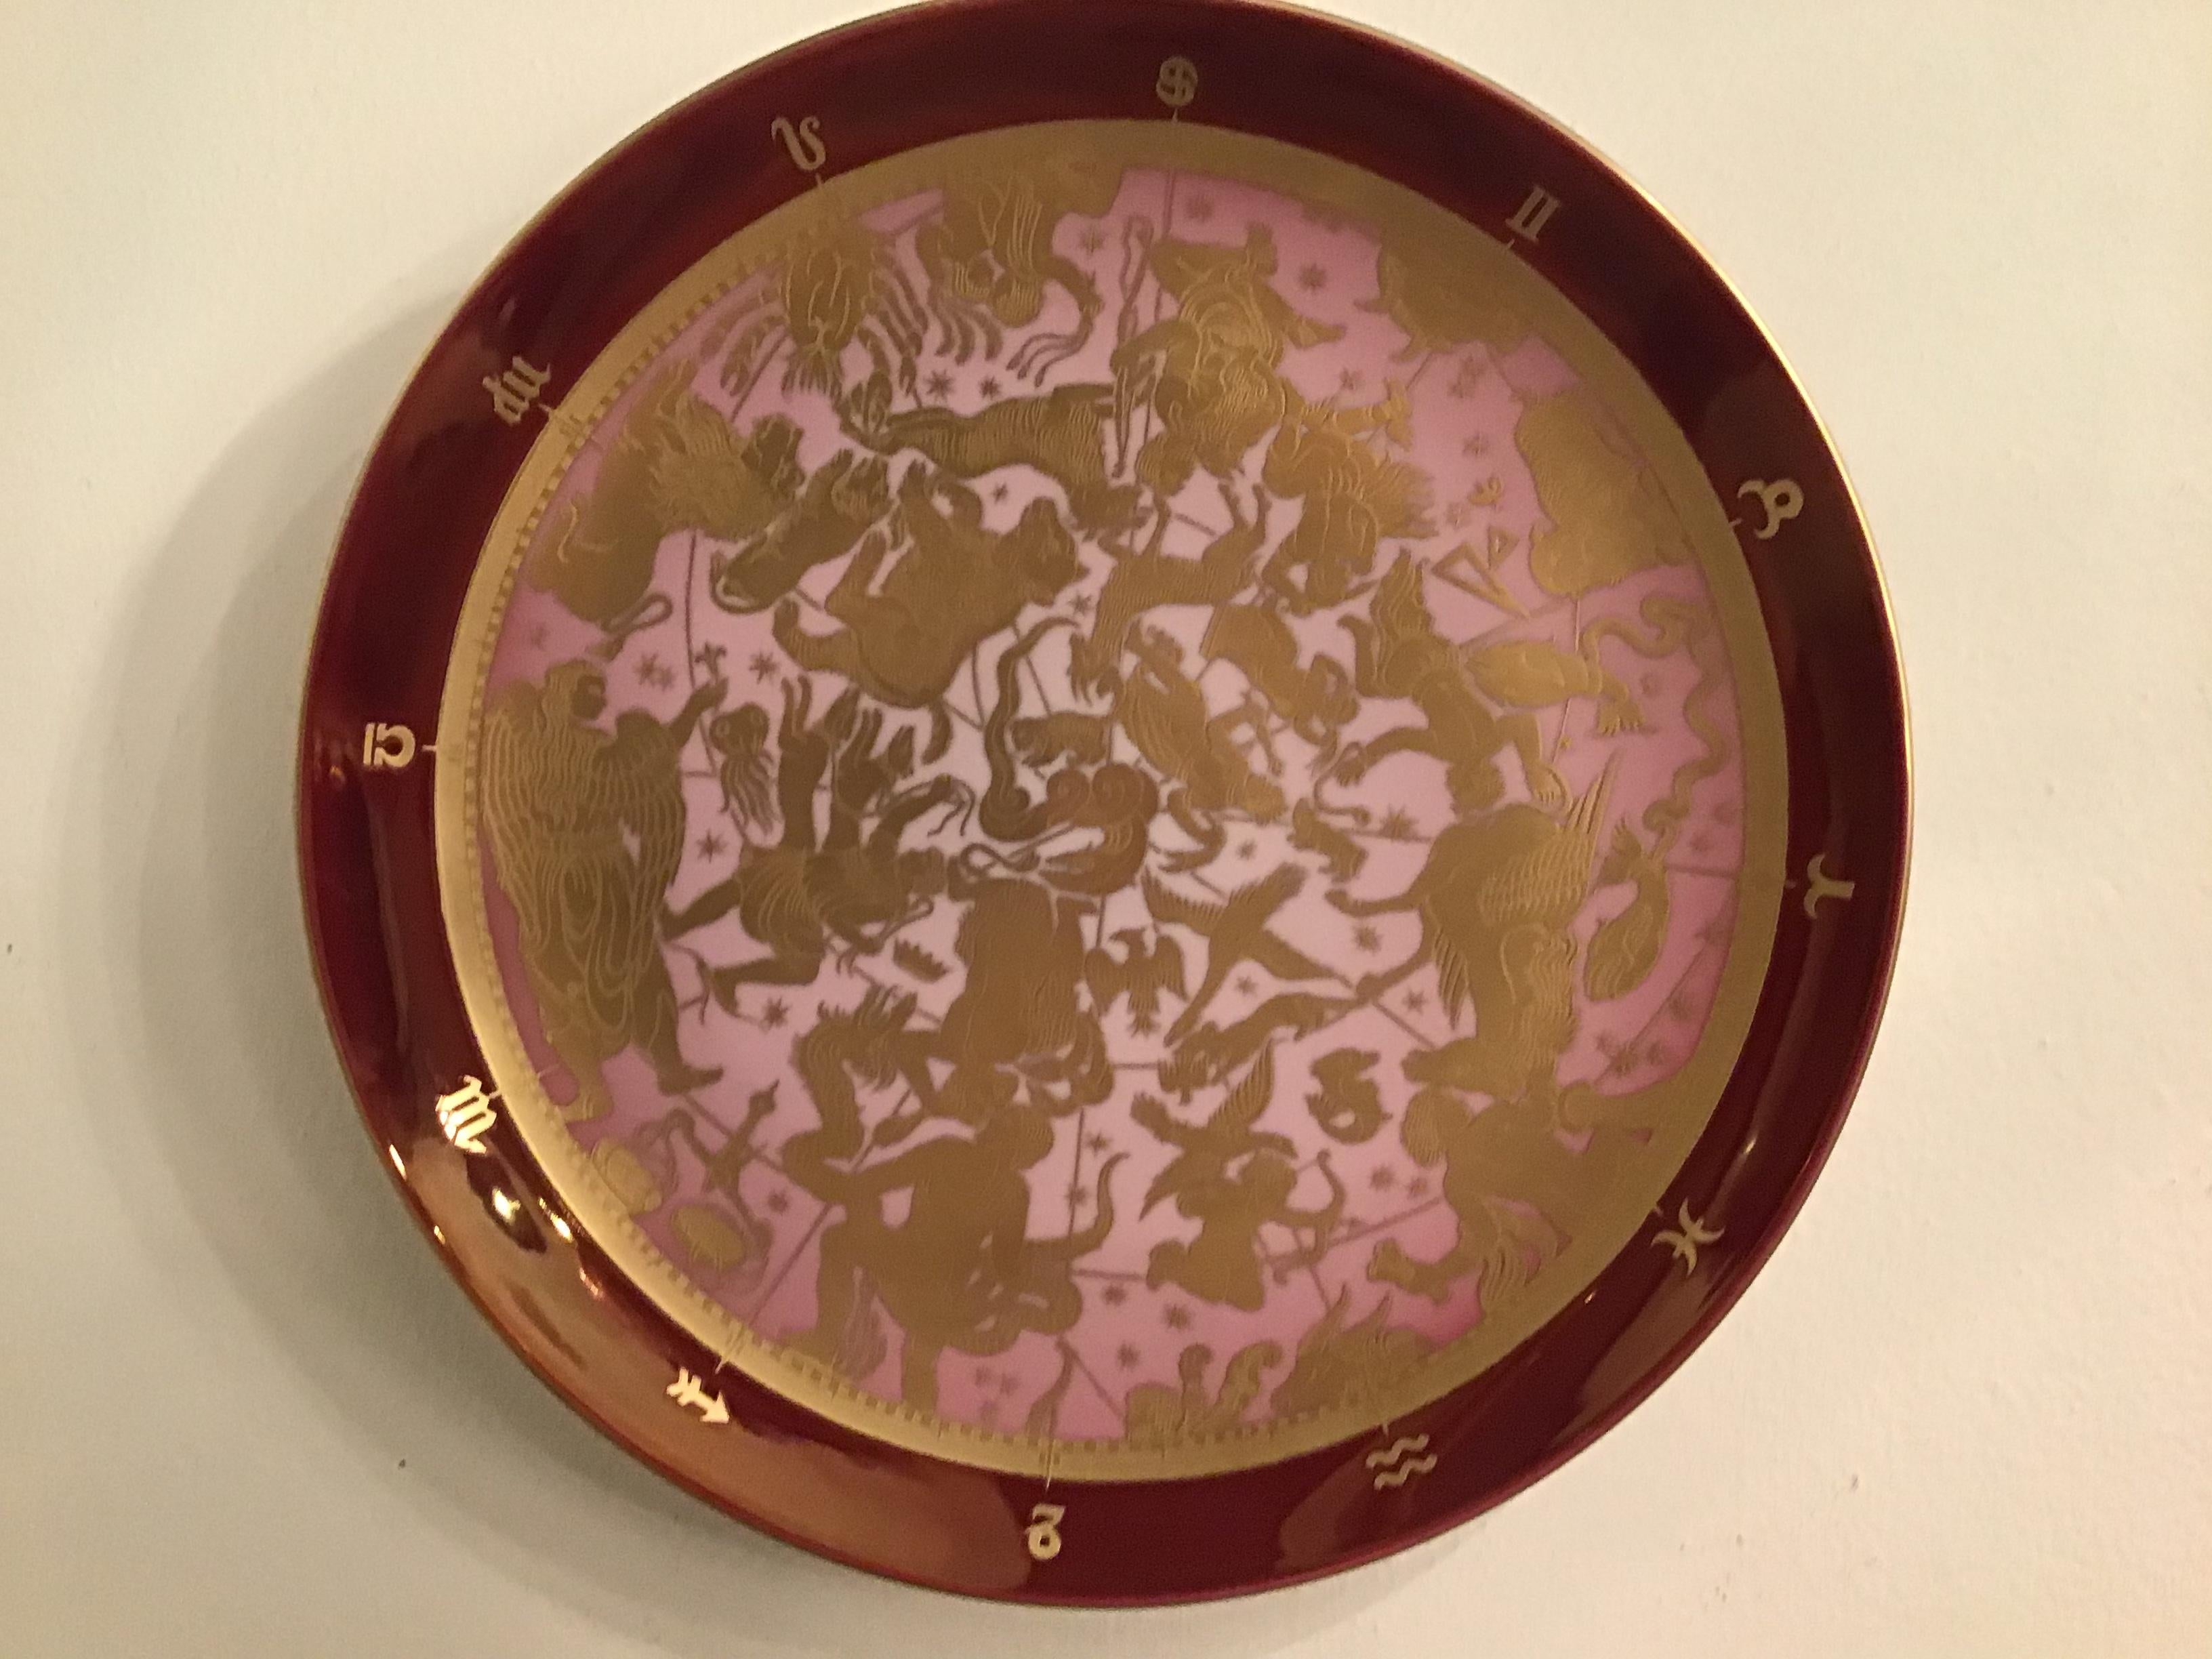 Other Morbelli Porcelain Wall Plate “Planisfero Celeste” Worked with Pure Gold 1960 It For Sale